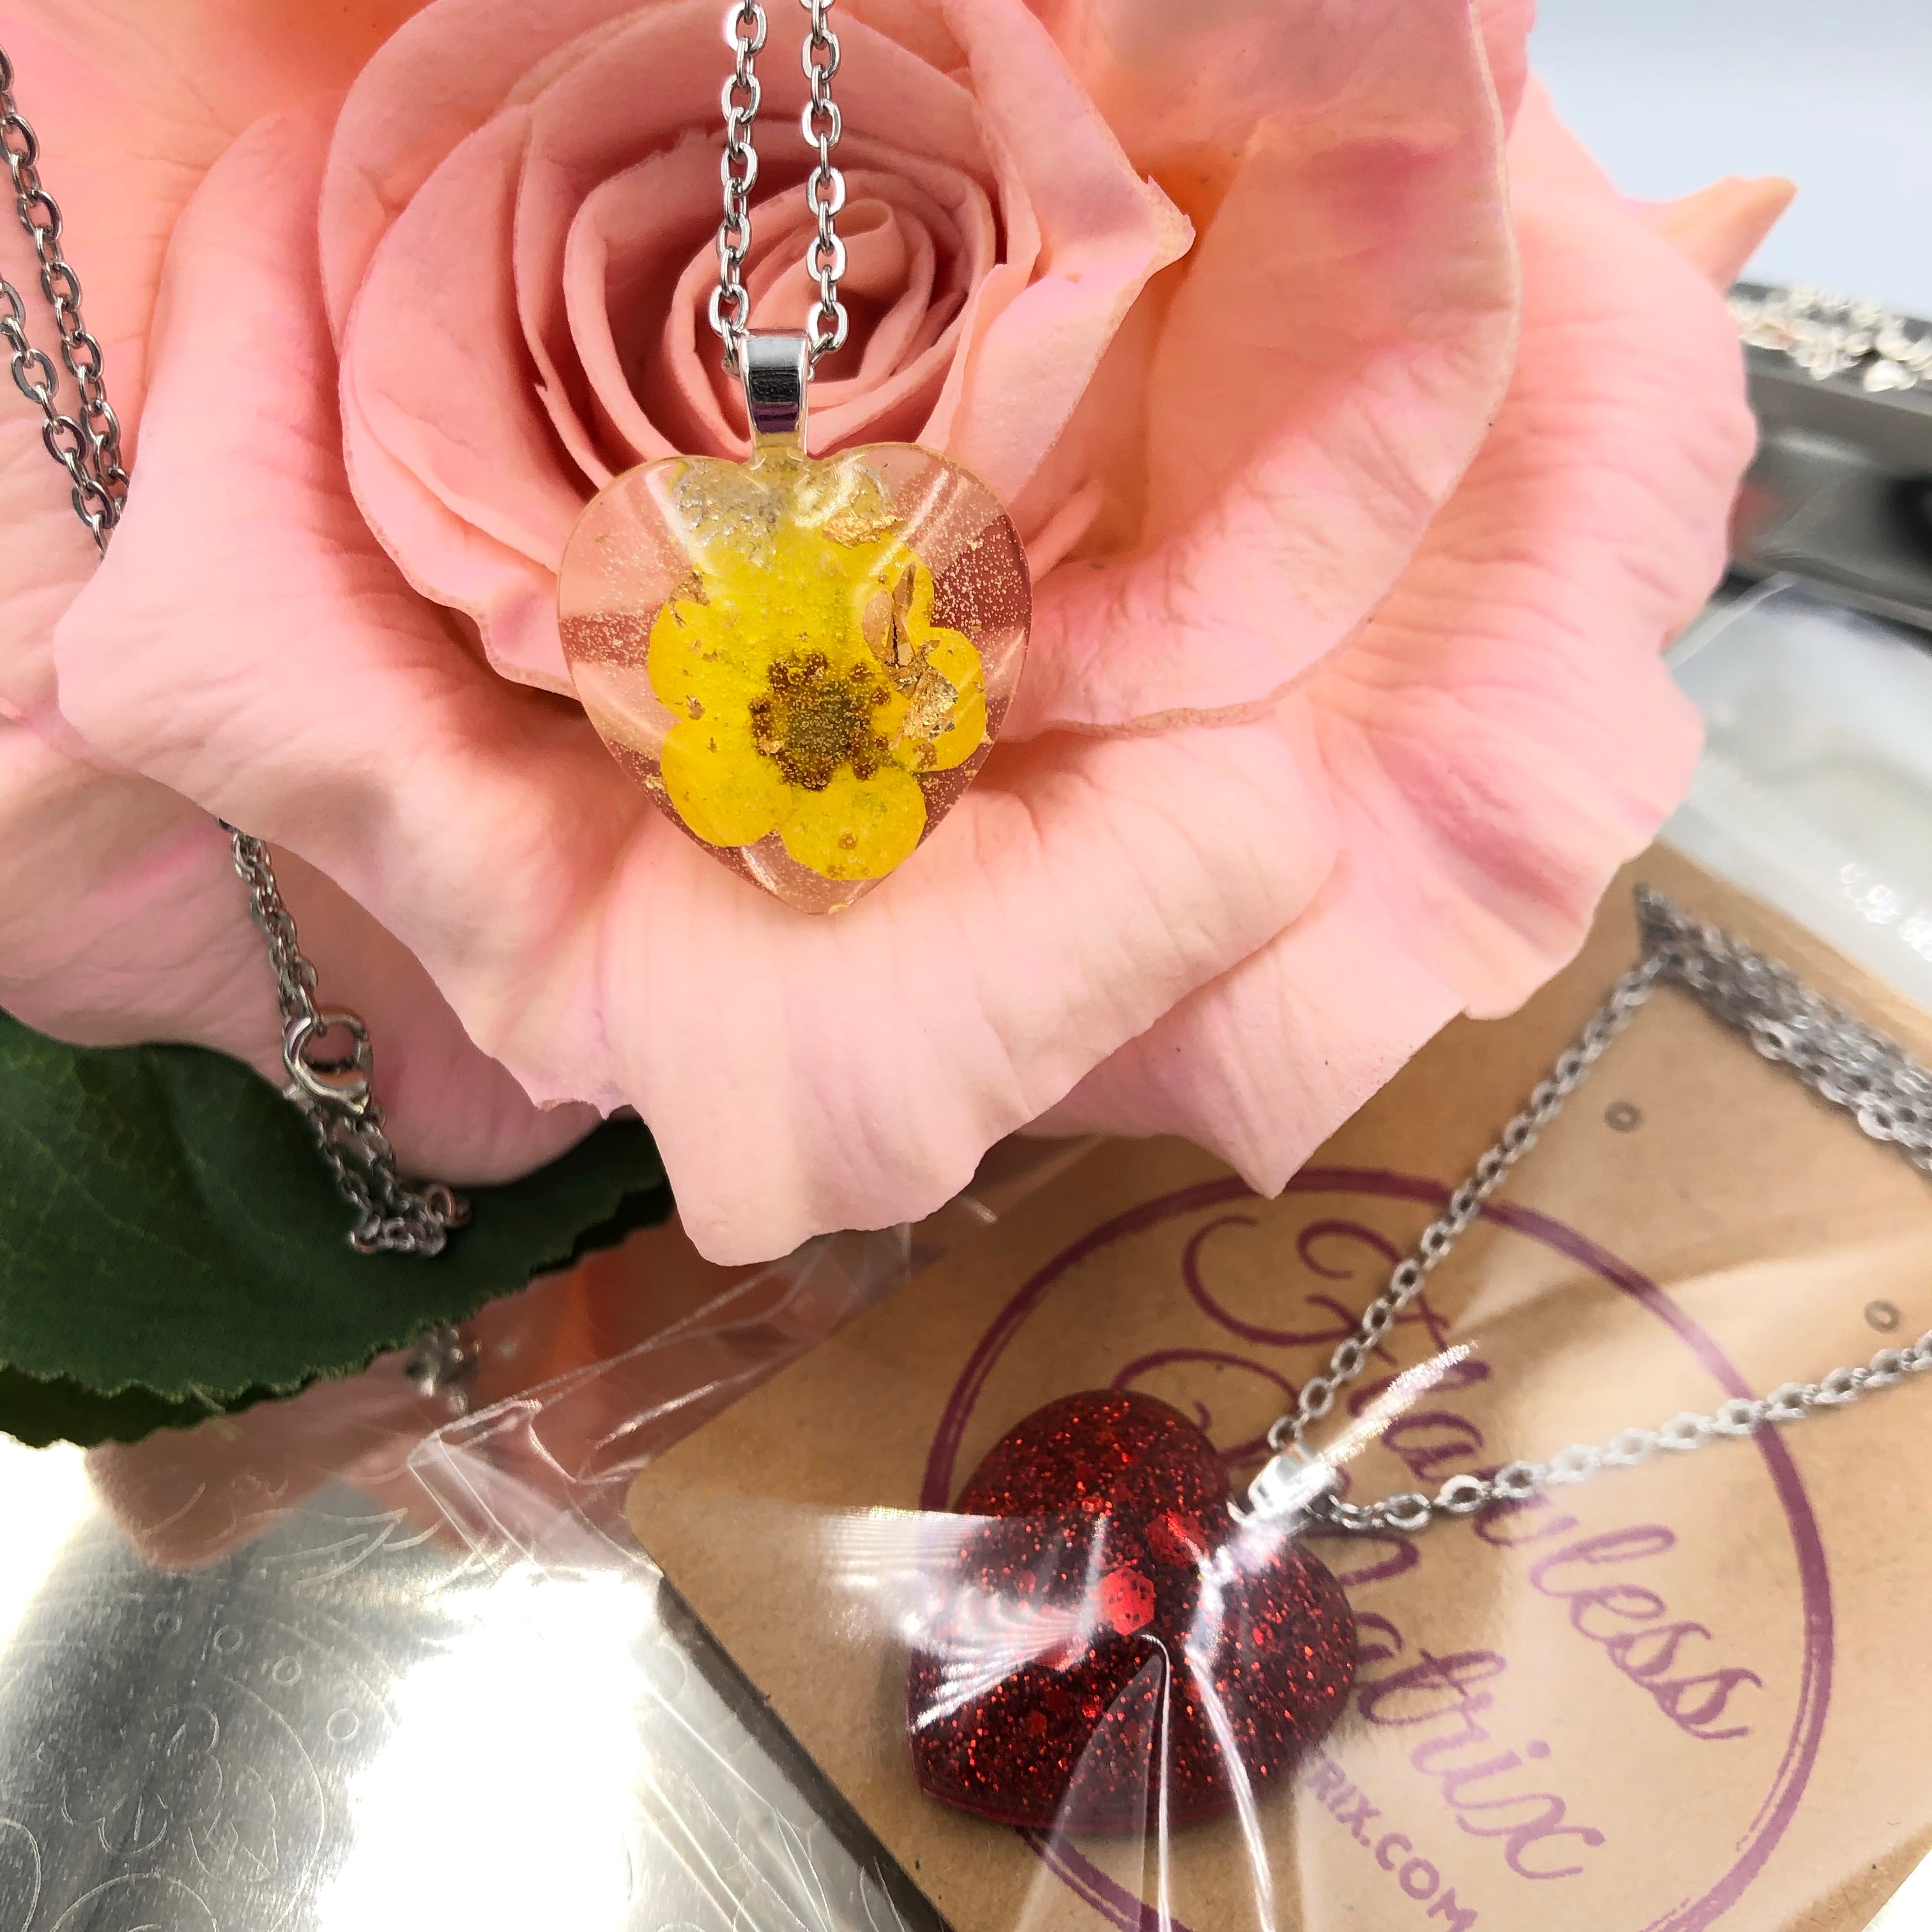 Pink Ozothamnus Pressed Flowers Necklace, Cottagecore Nature Inspired  Jewelry, Flowers in Resin Necklace, Unique Pink Dried Flower Jewelry - Etsy  | Real flower jewelry, Dried flower jewelry, Flower resin jewelry